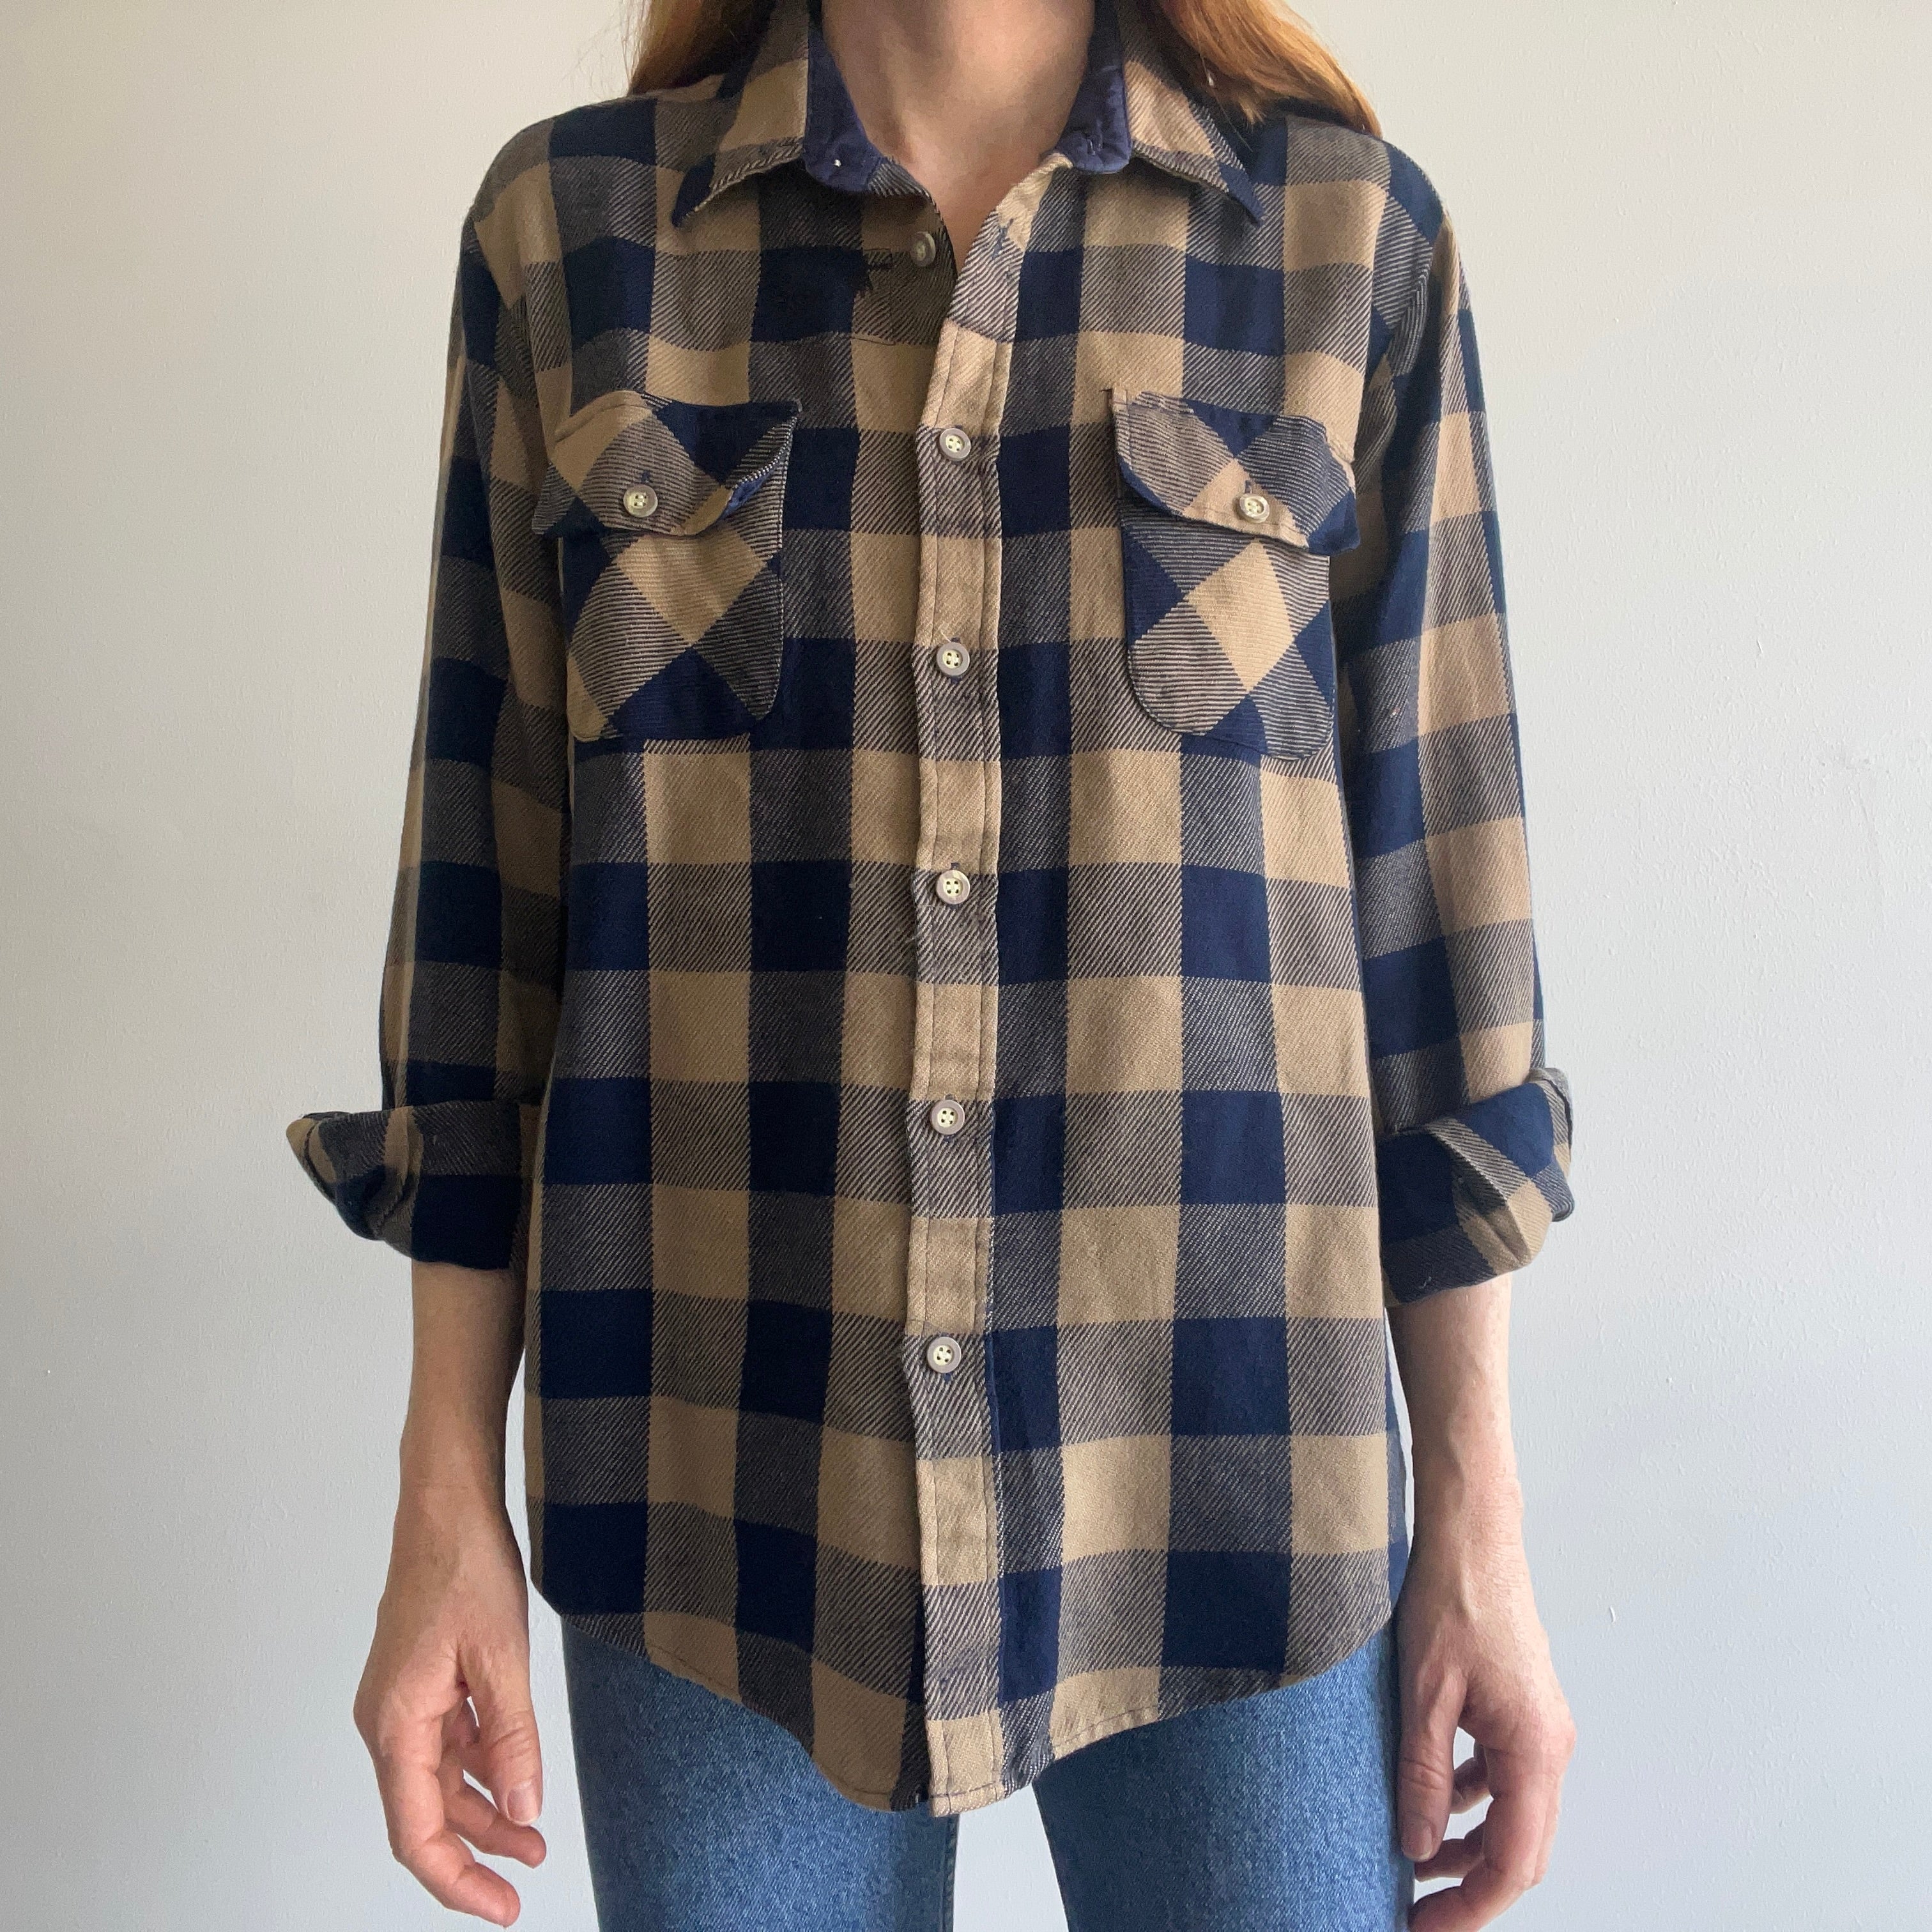 1970s Soft Tan and Navy Buffalo Plaid Flannel with Mending